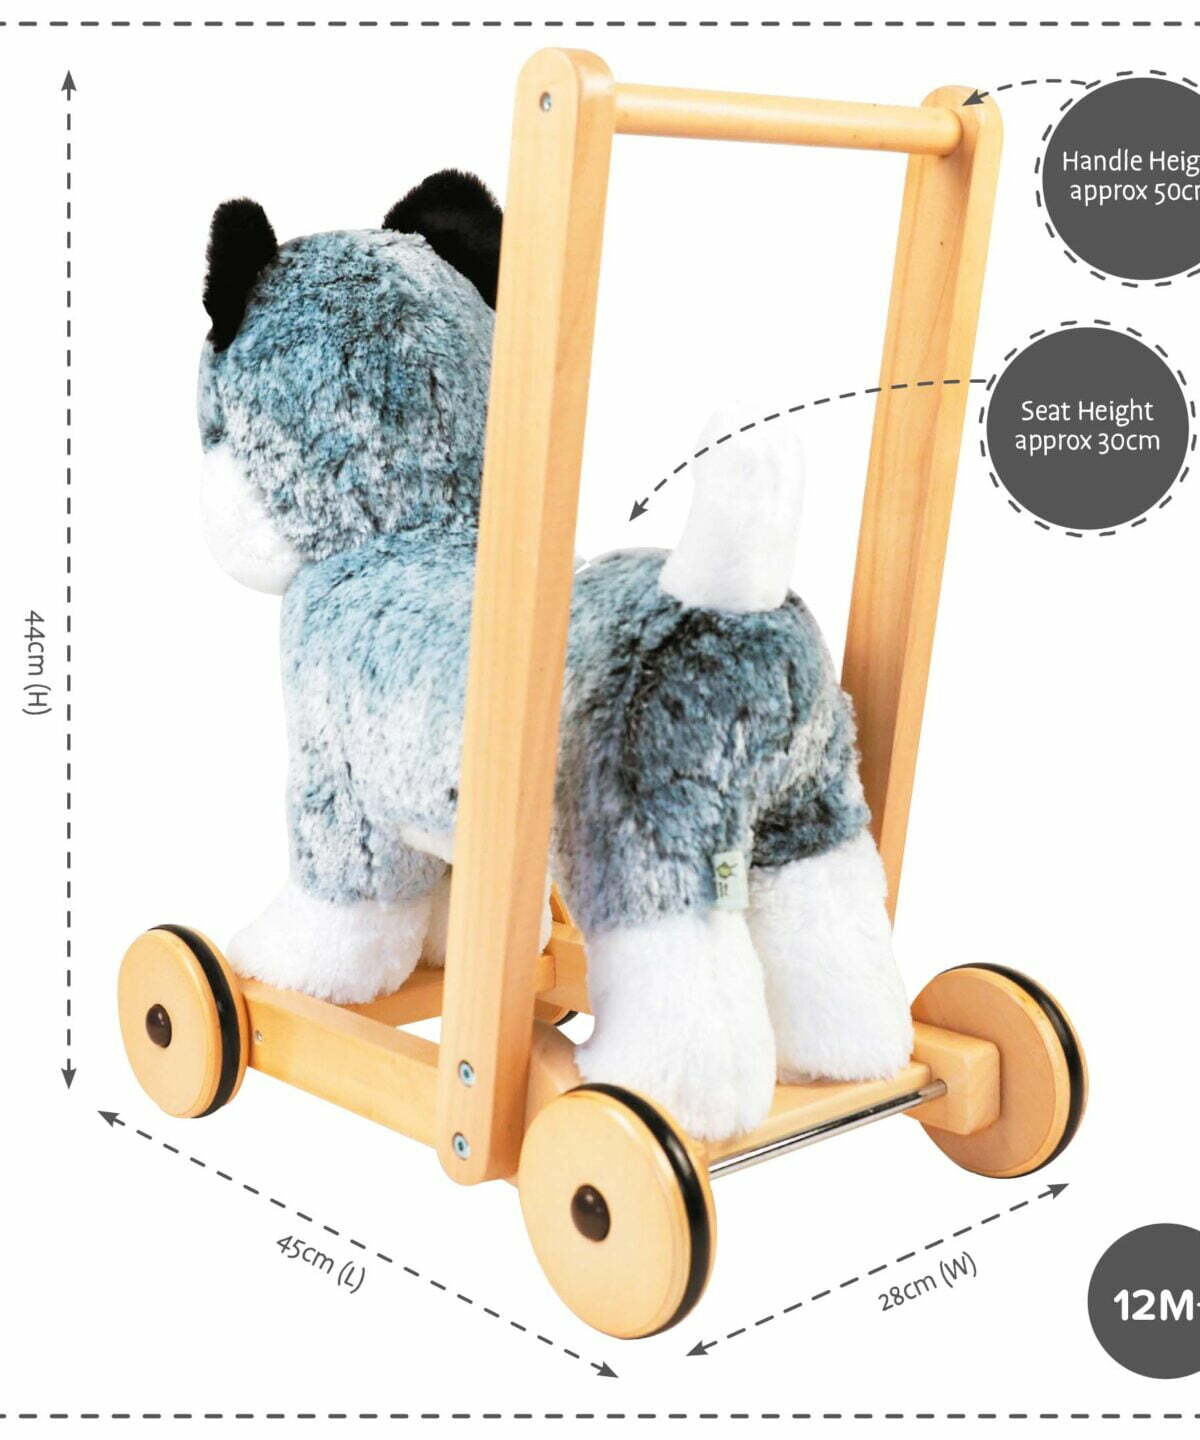 Product dimensions displayed for Mishka Dog Baby Walker